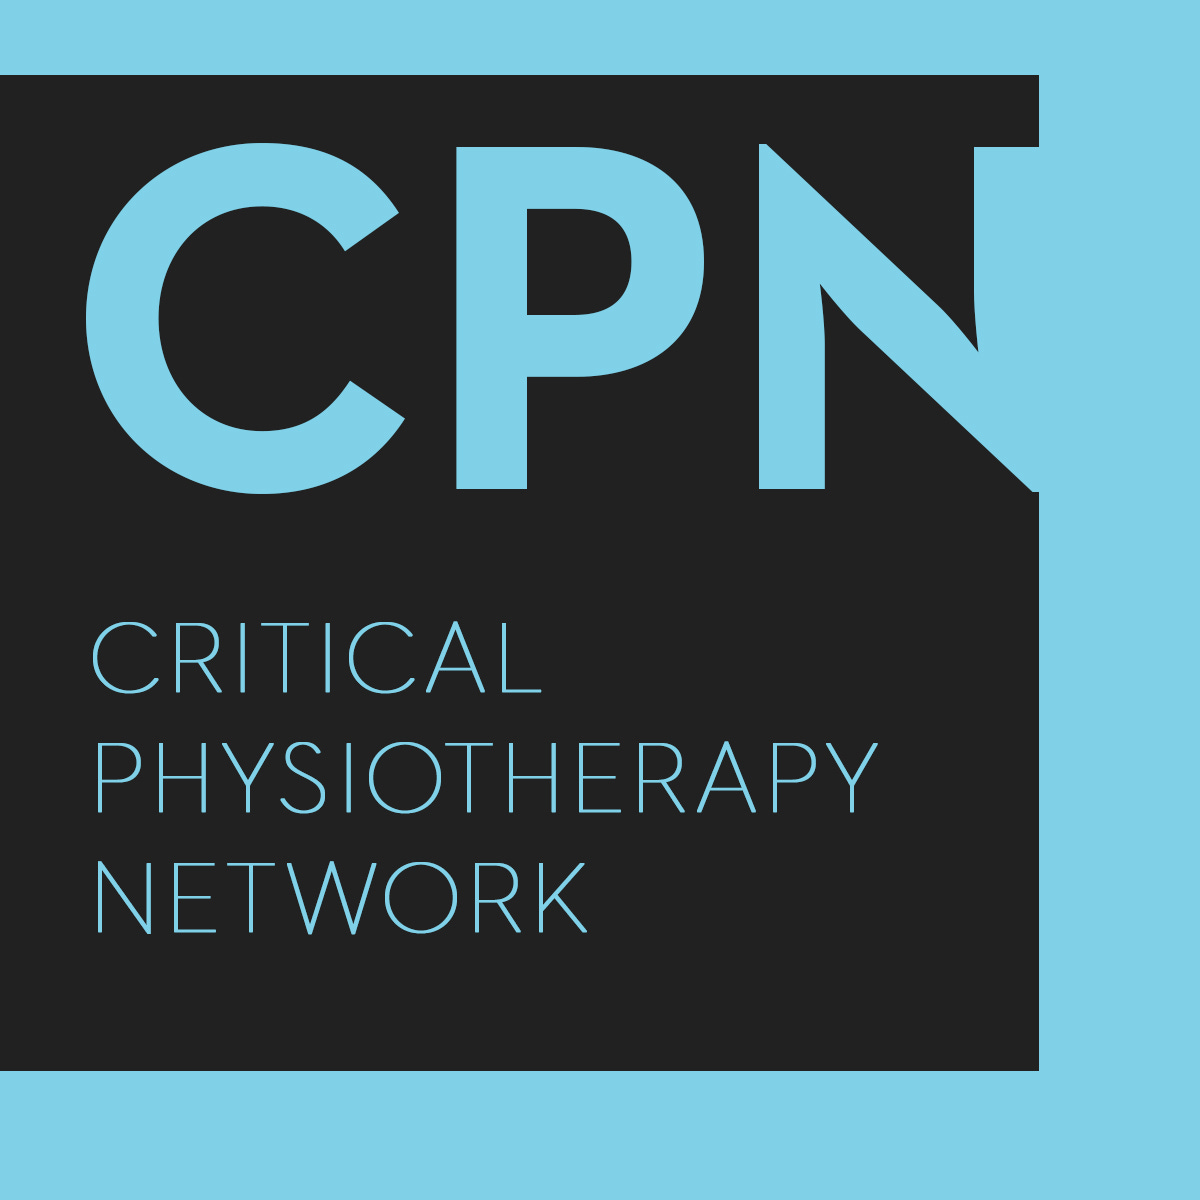 The Critical Physiotherapy Network Herald